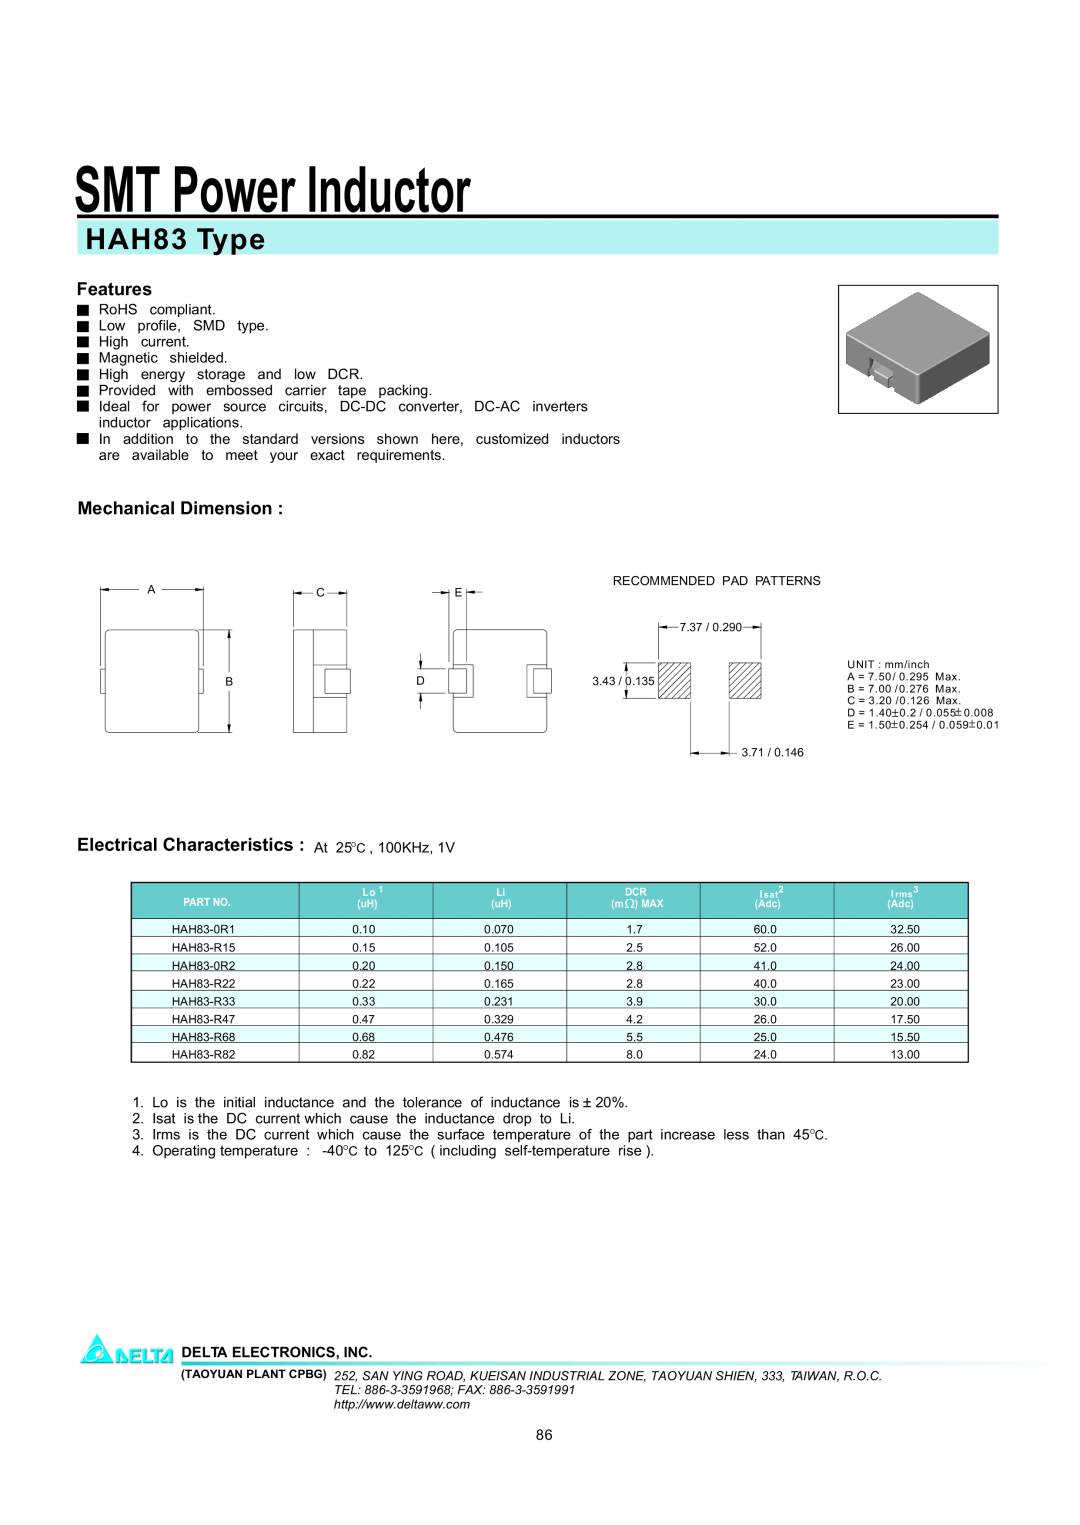 Delta Electronics manual SMT Power Inductor, HAH83 Type, Features, Mechanical Dimension, Delta Electronics, Inc 